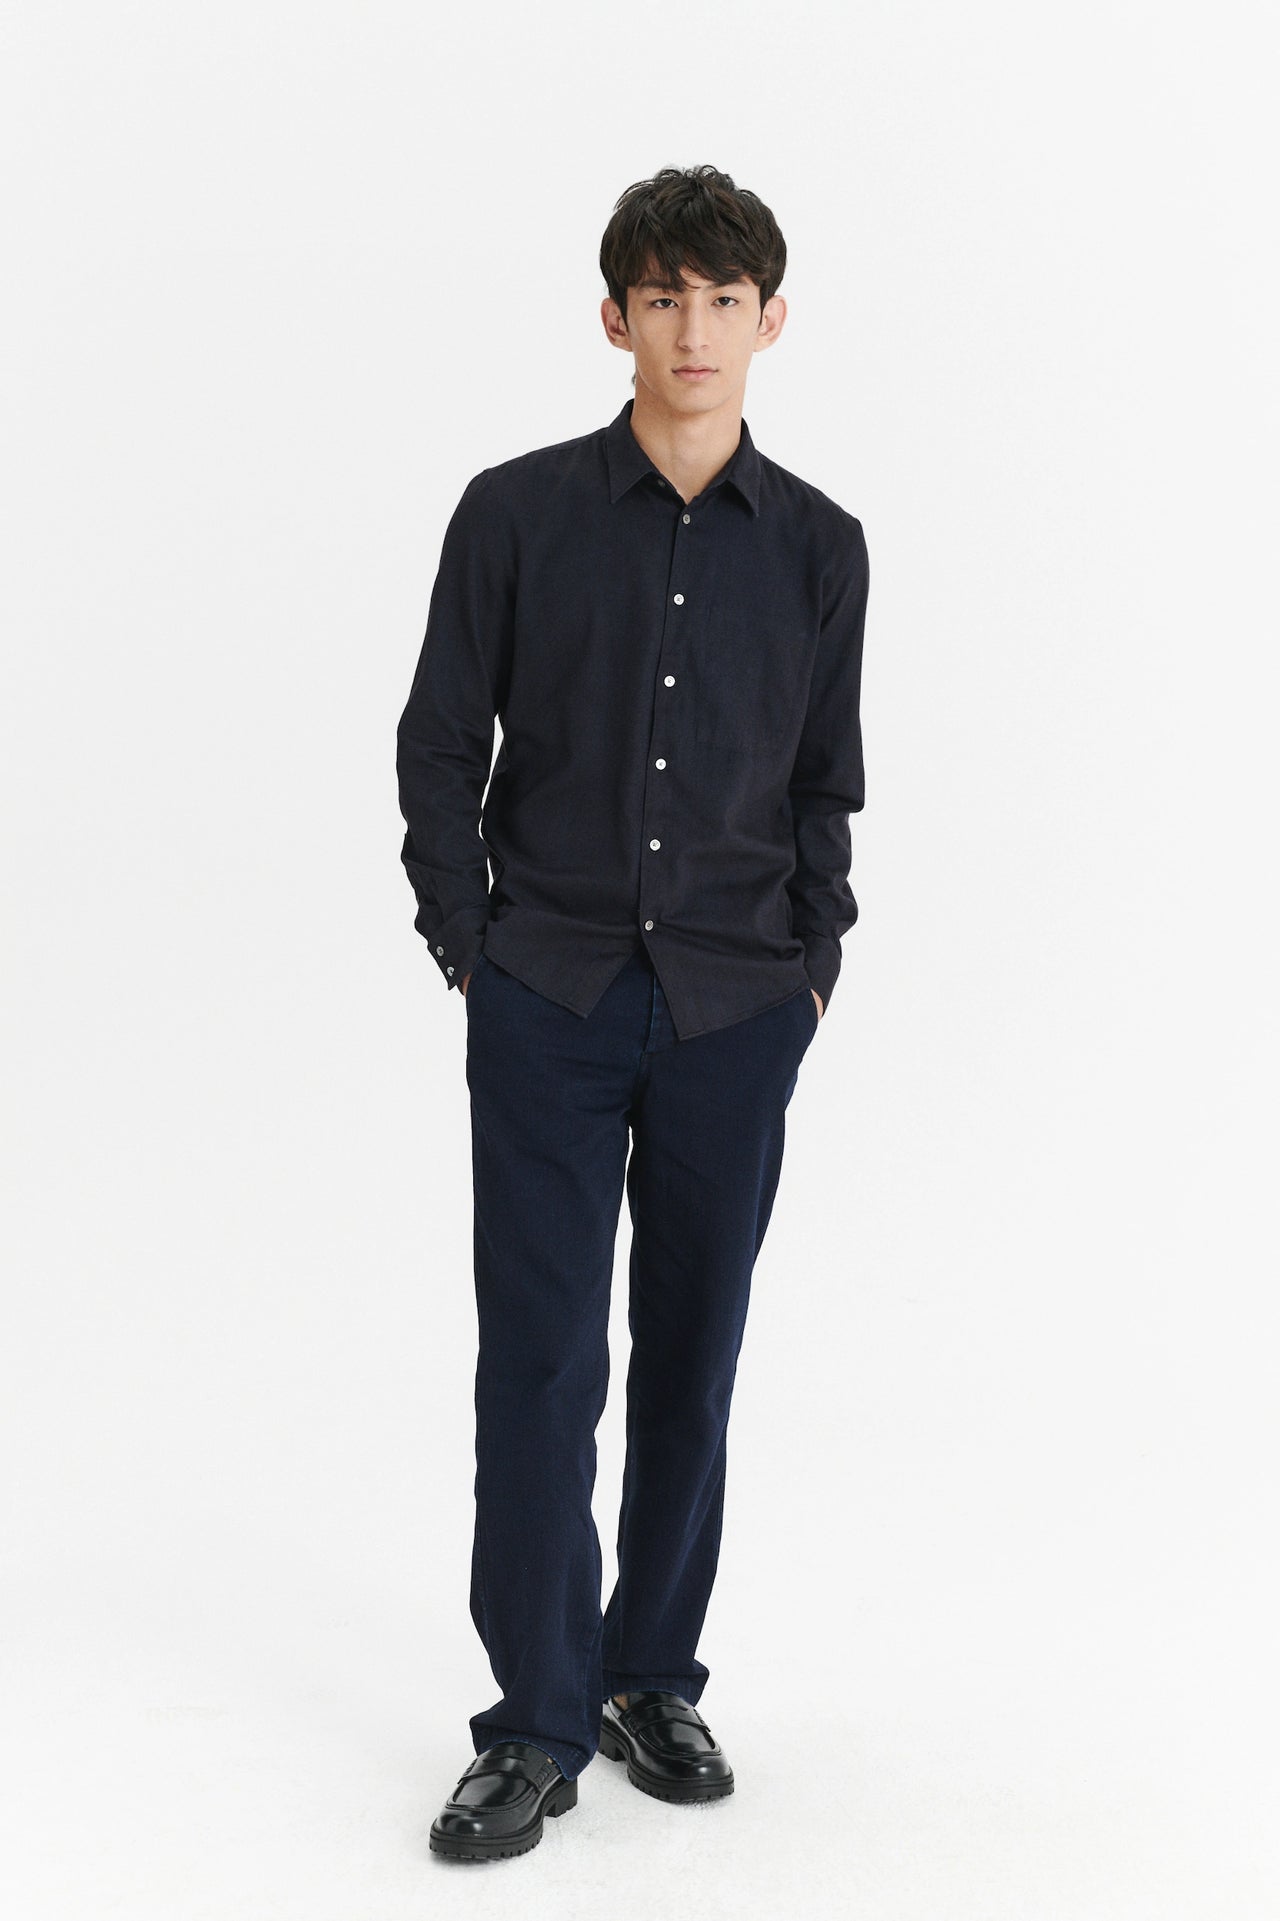 Feel Good Shirt in a Dark Blue Utterly Soft and Silky Italian Lyocell and Cotton Flannel by Albini